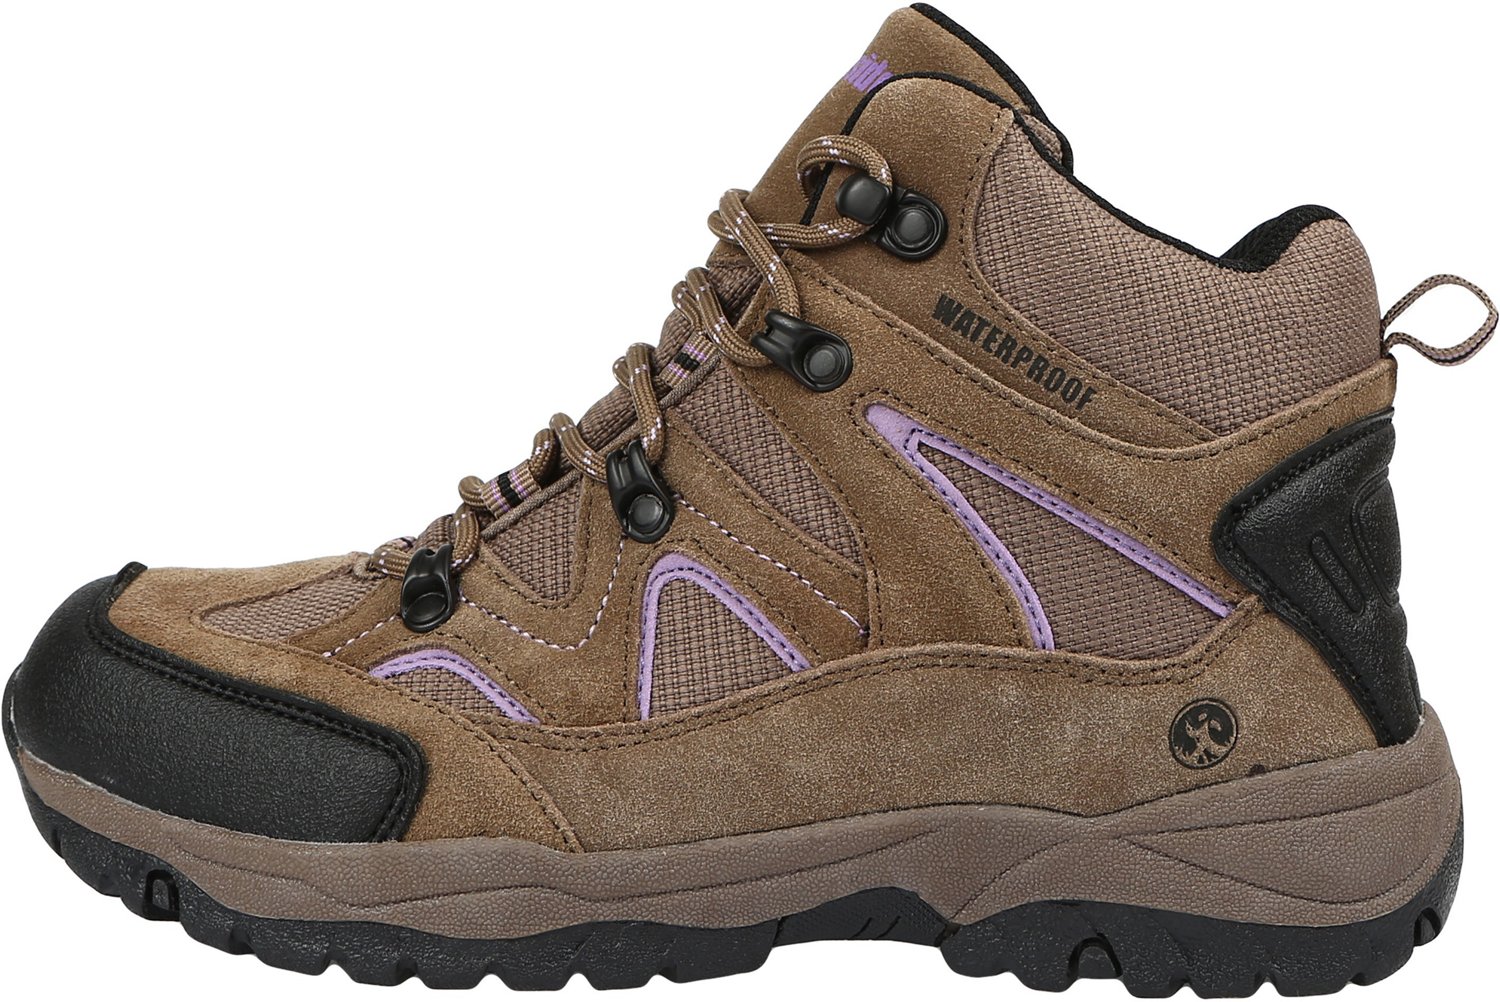 Northside Women's Snohomish Hiking Boots | Academy